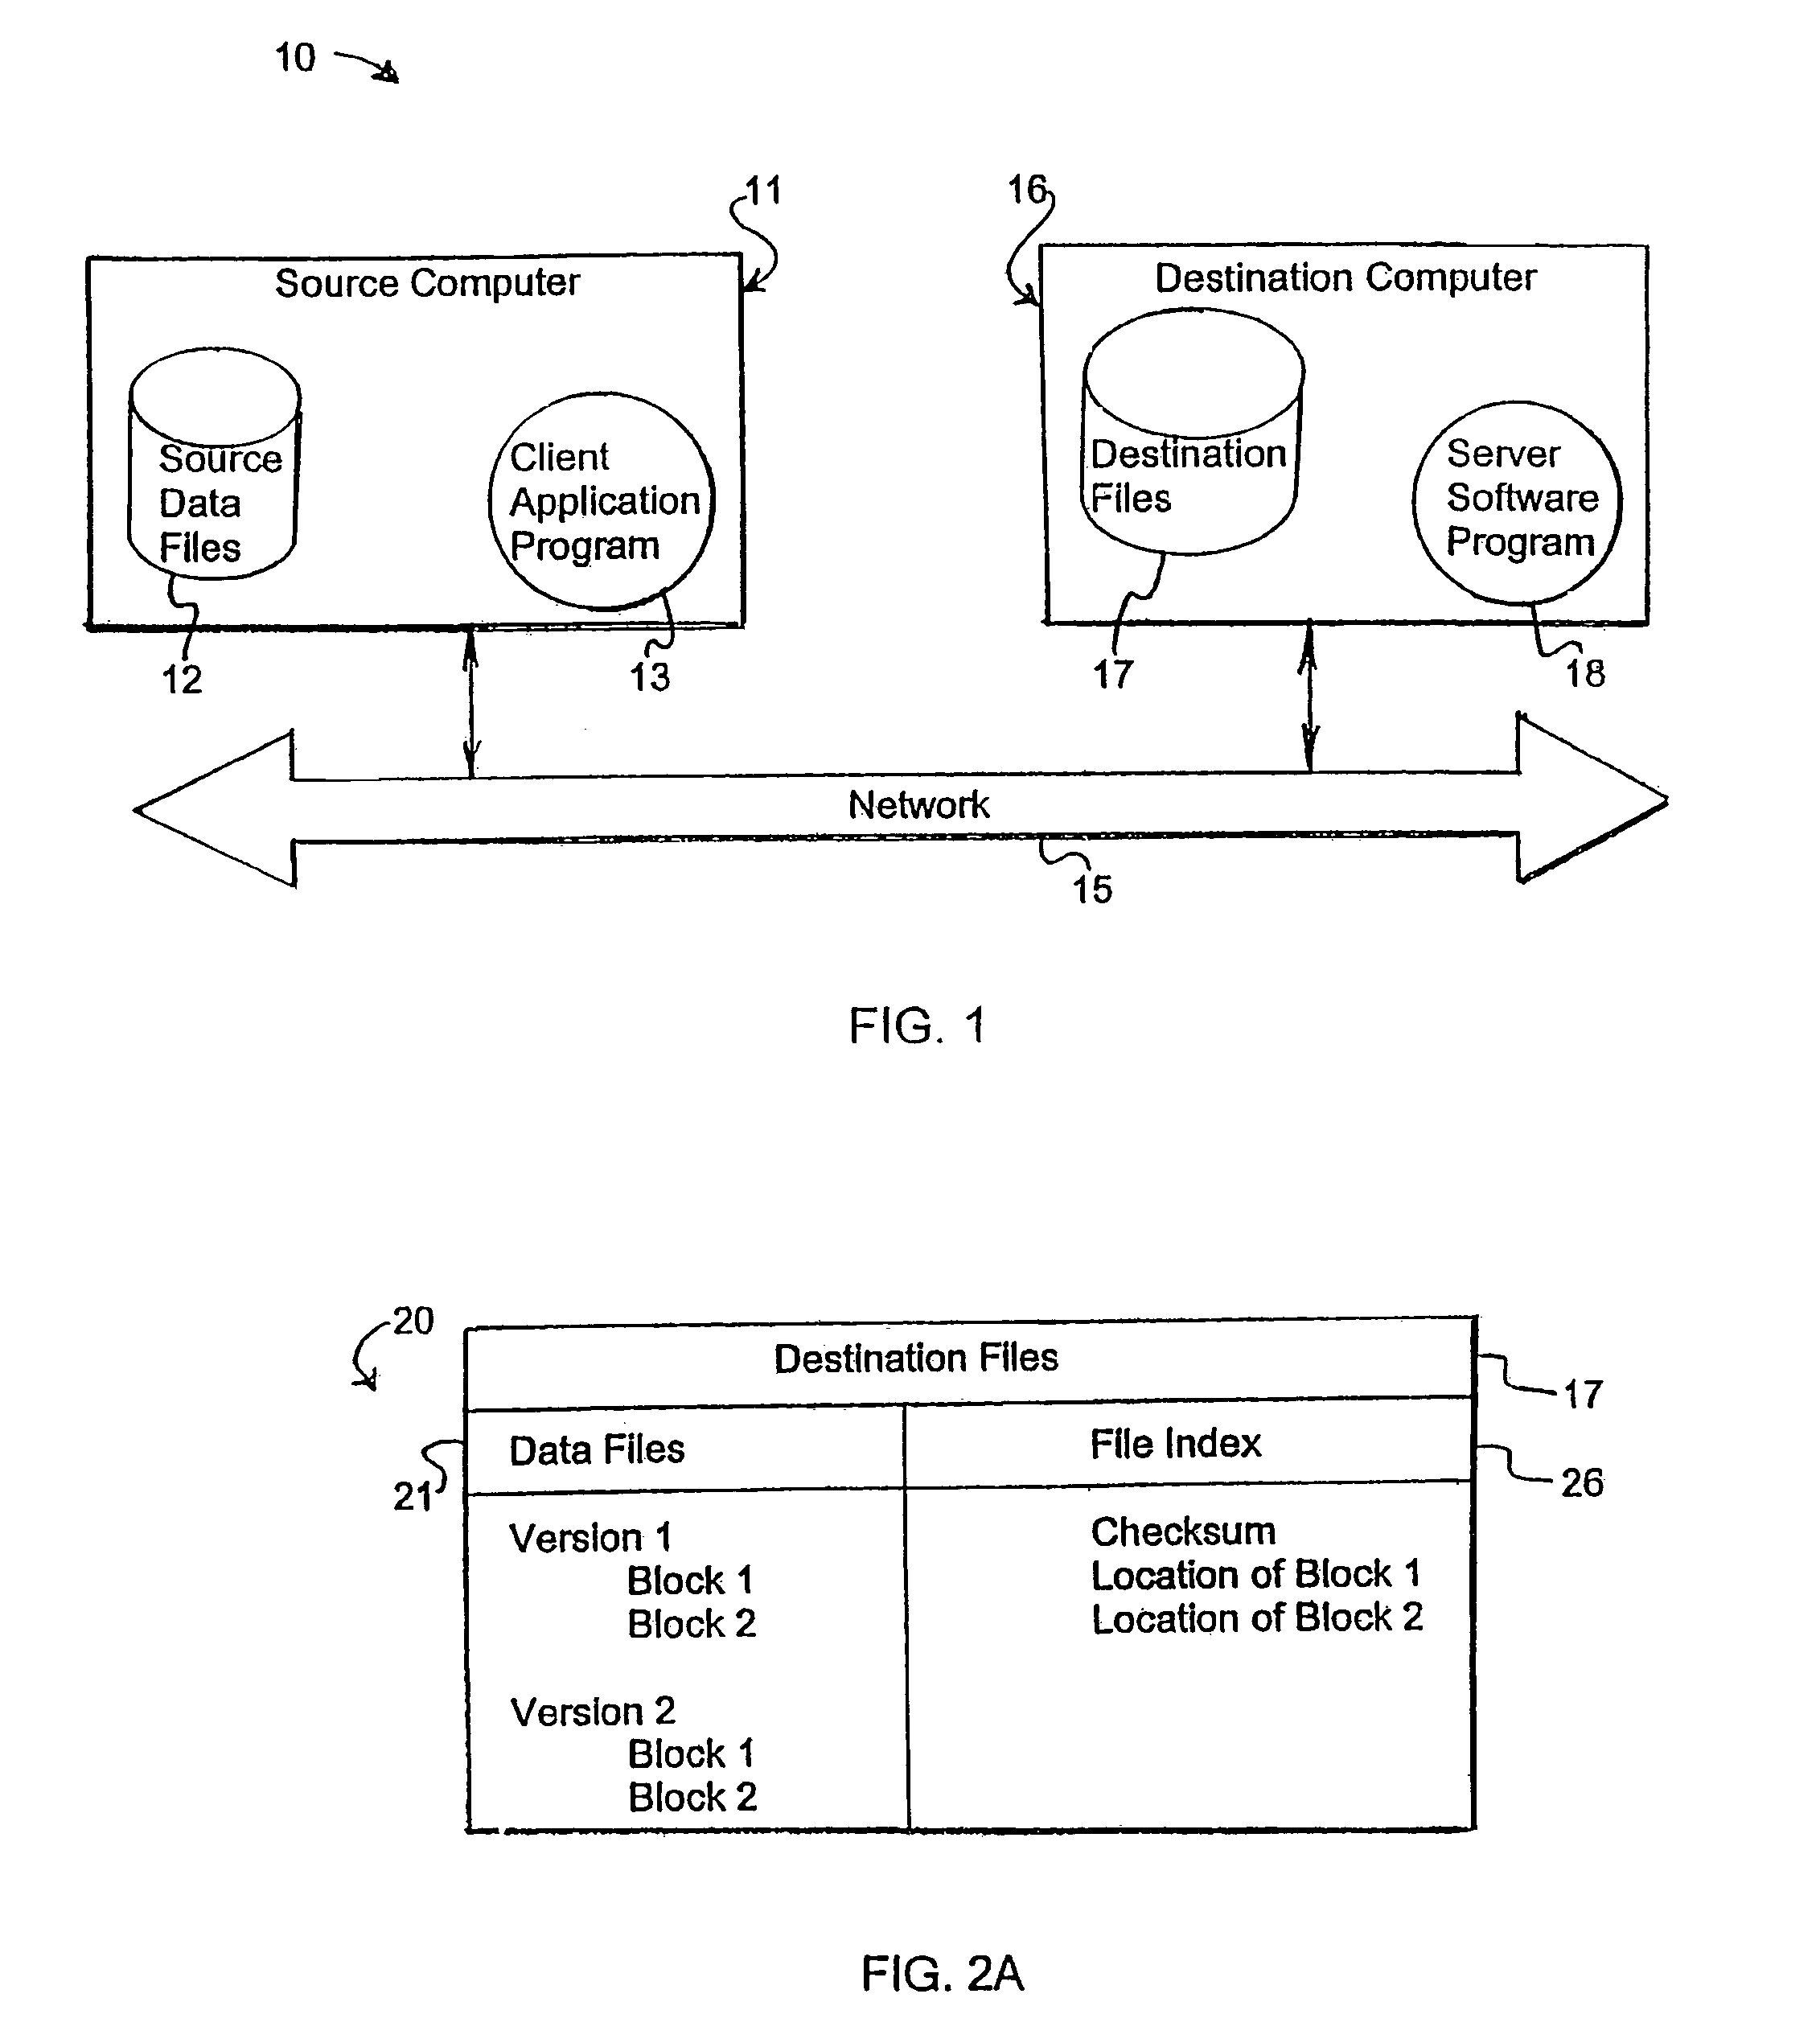 Storing and retrieving computer data files using an encrypted network drive file system